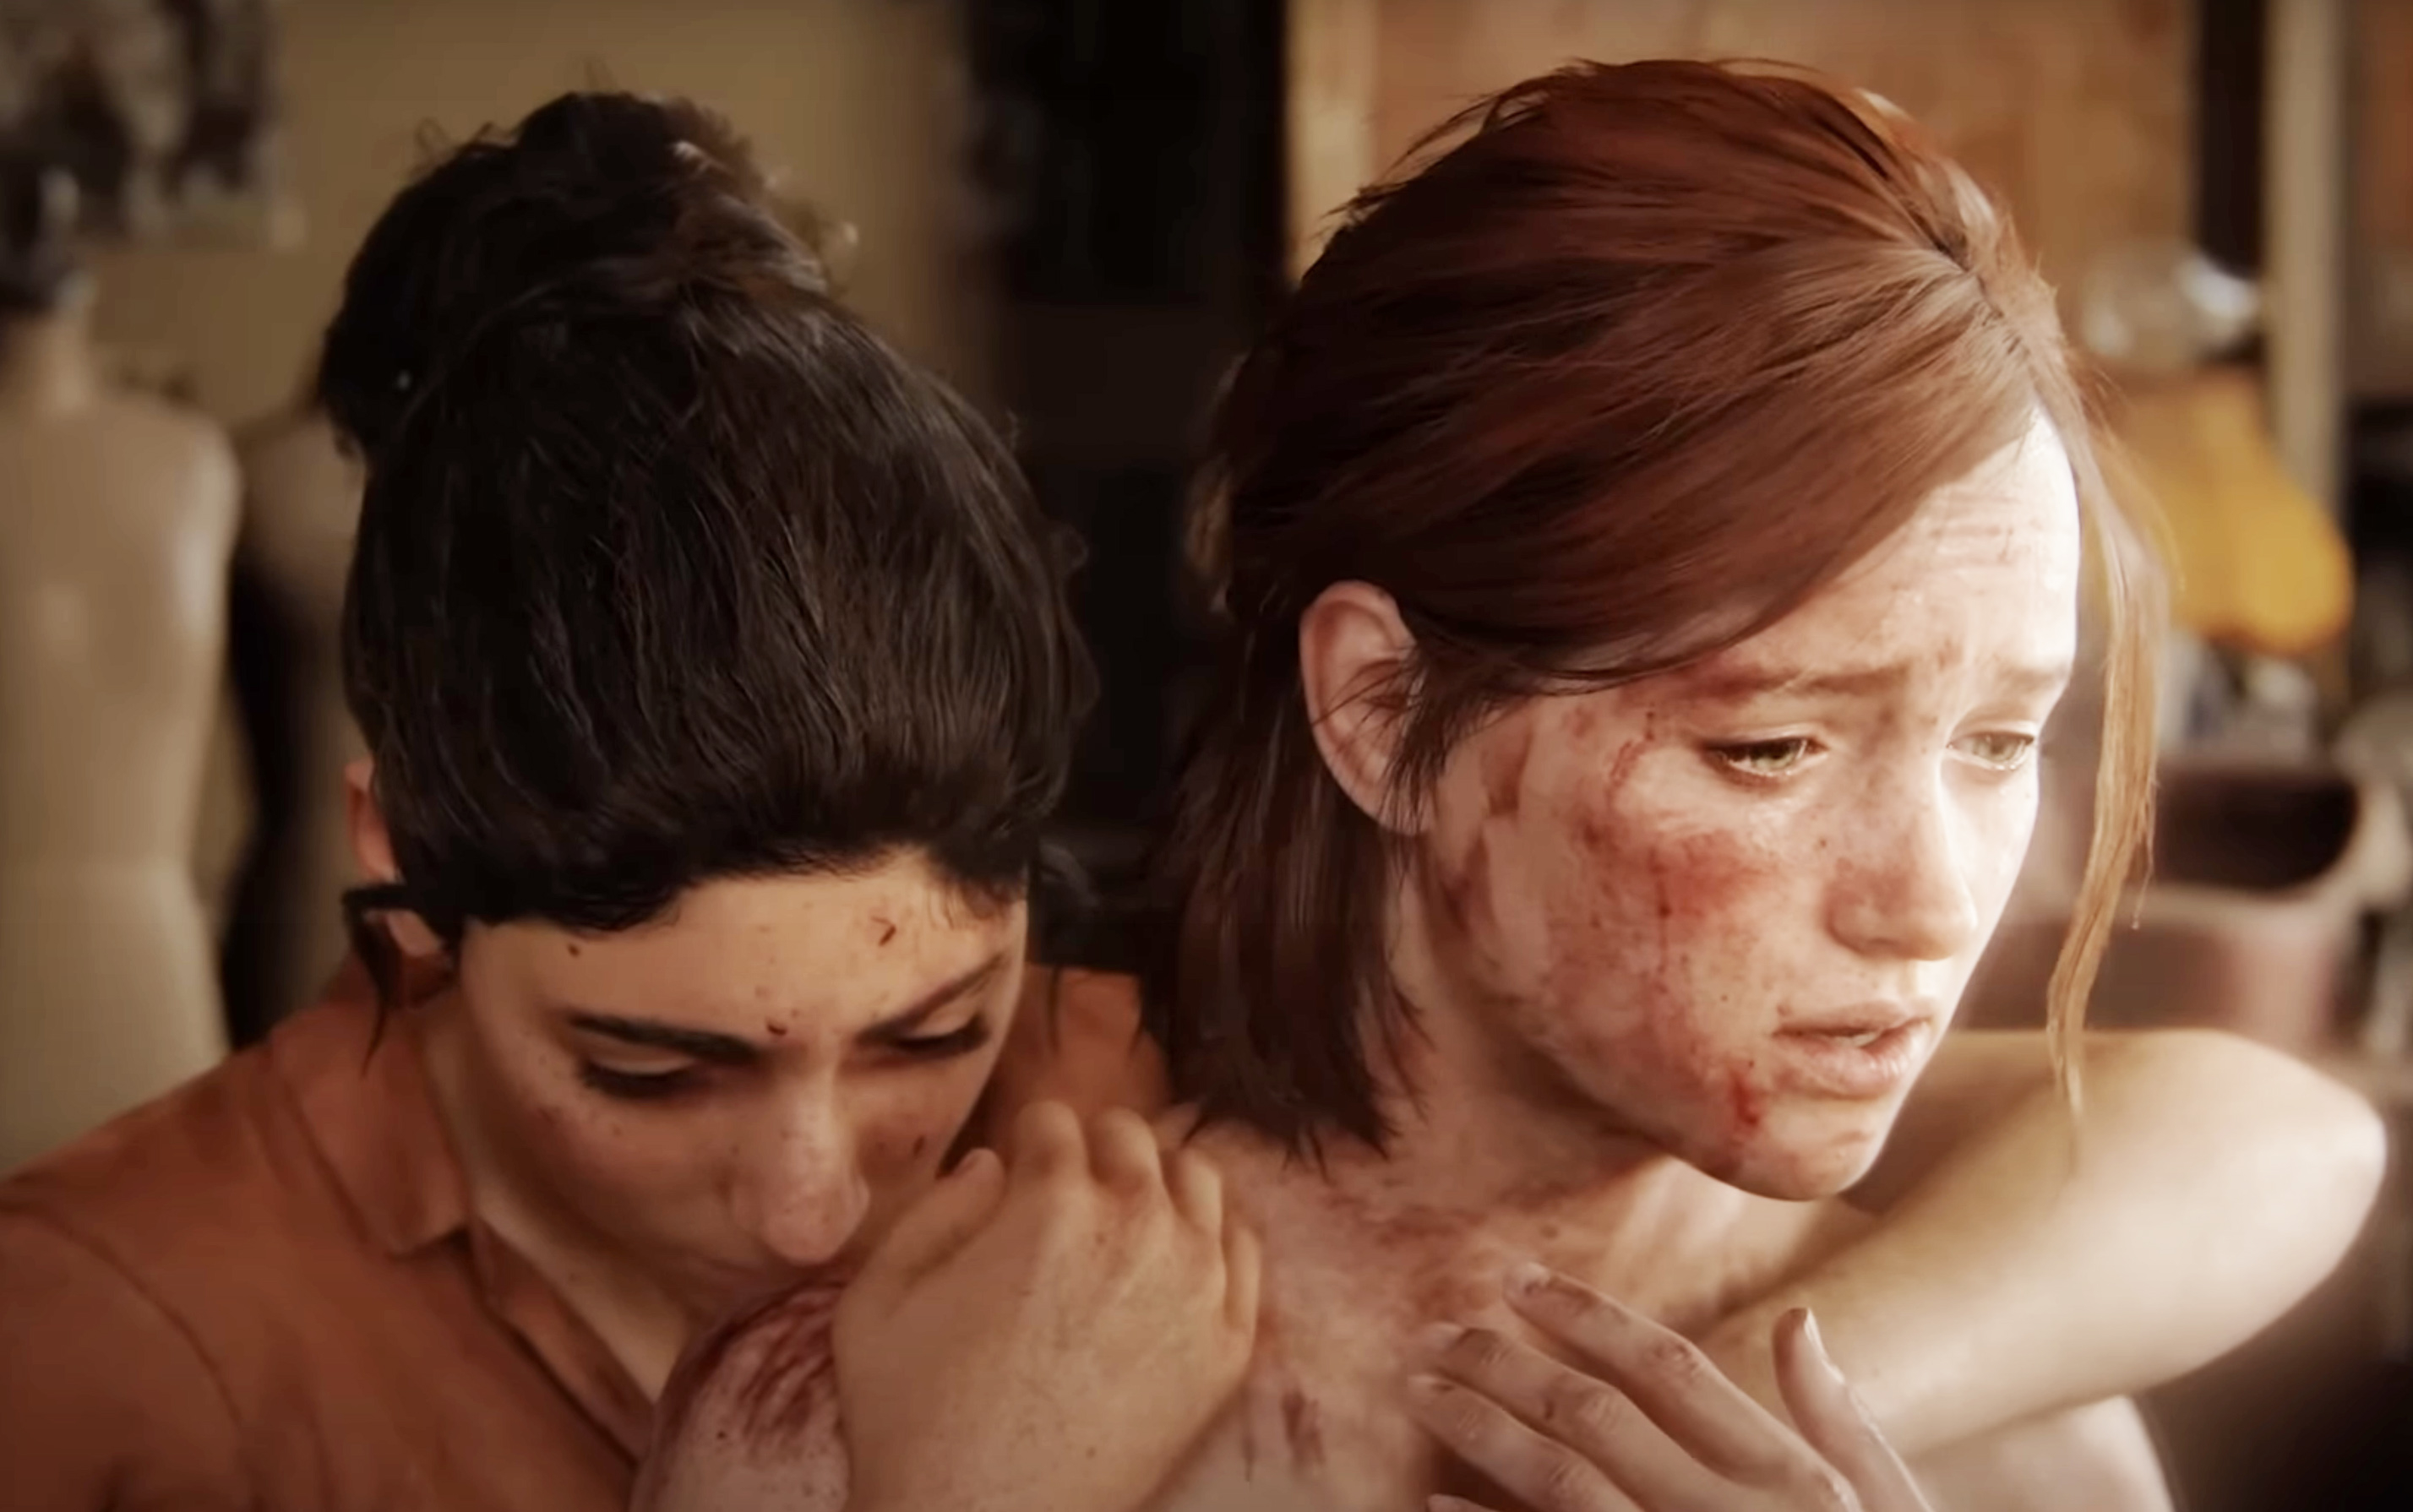 Two characters, Ellie and Dina from the video game &quot;The Last of Us,&quot; appear distressed, embracing for comfort